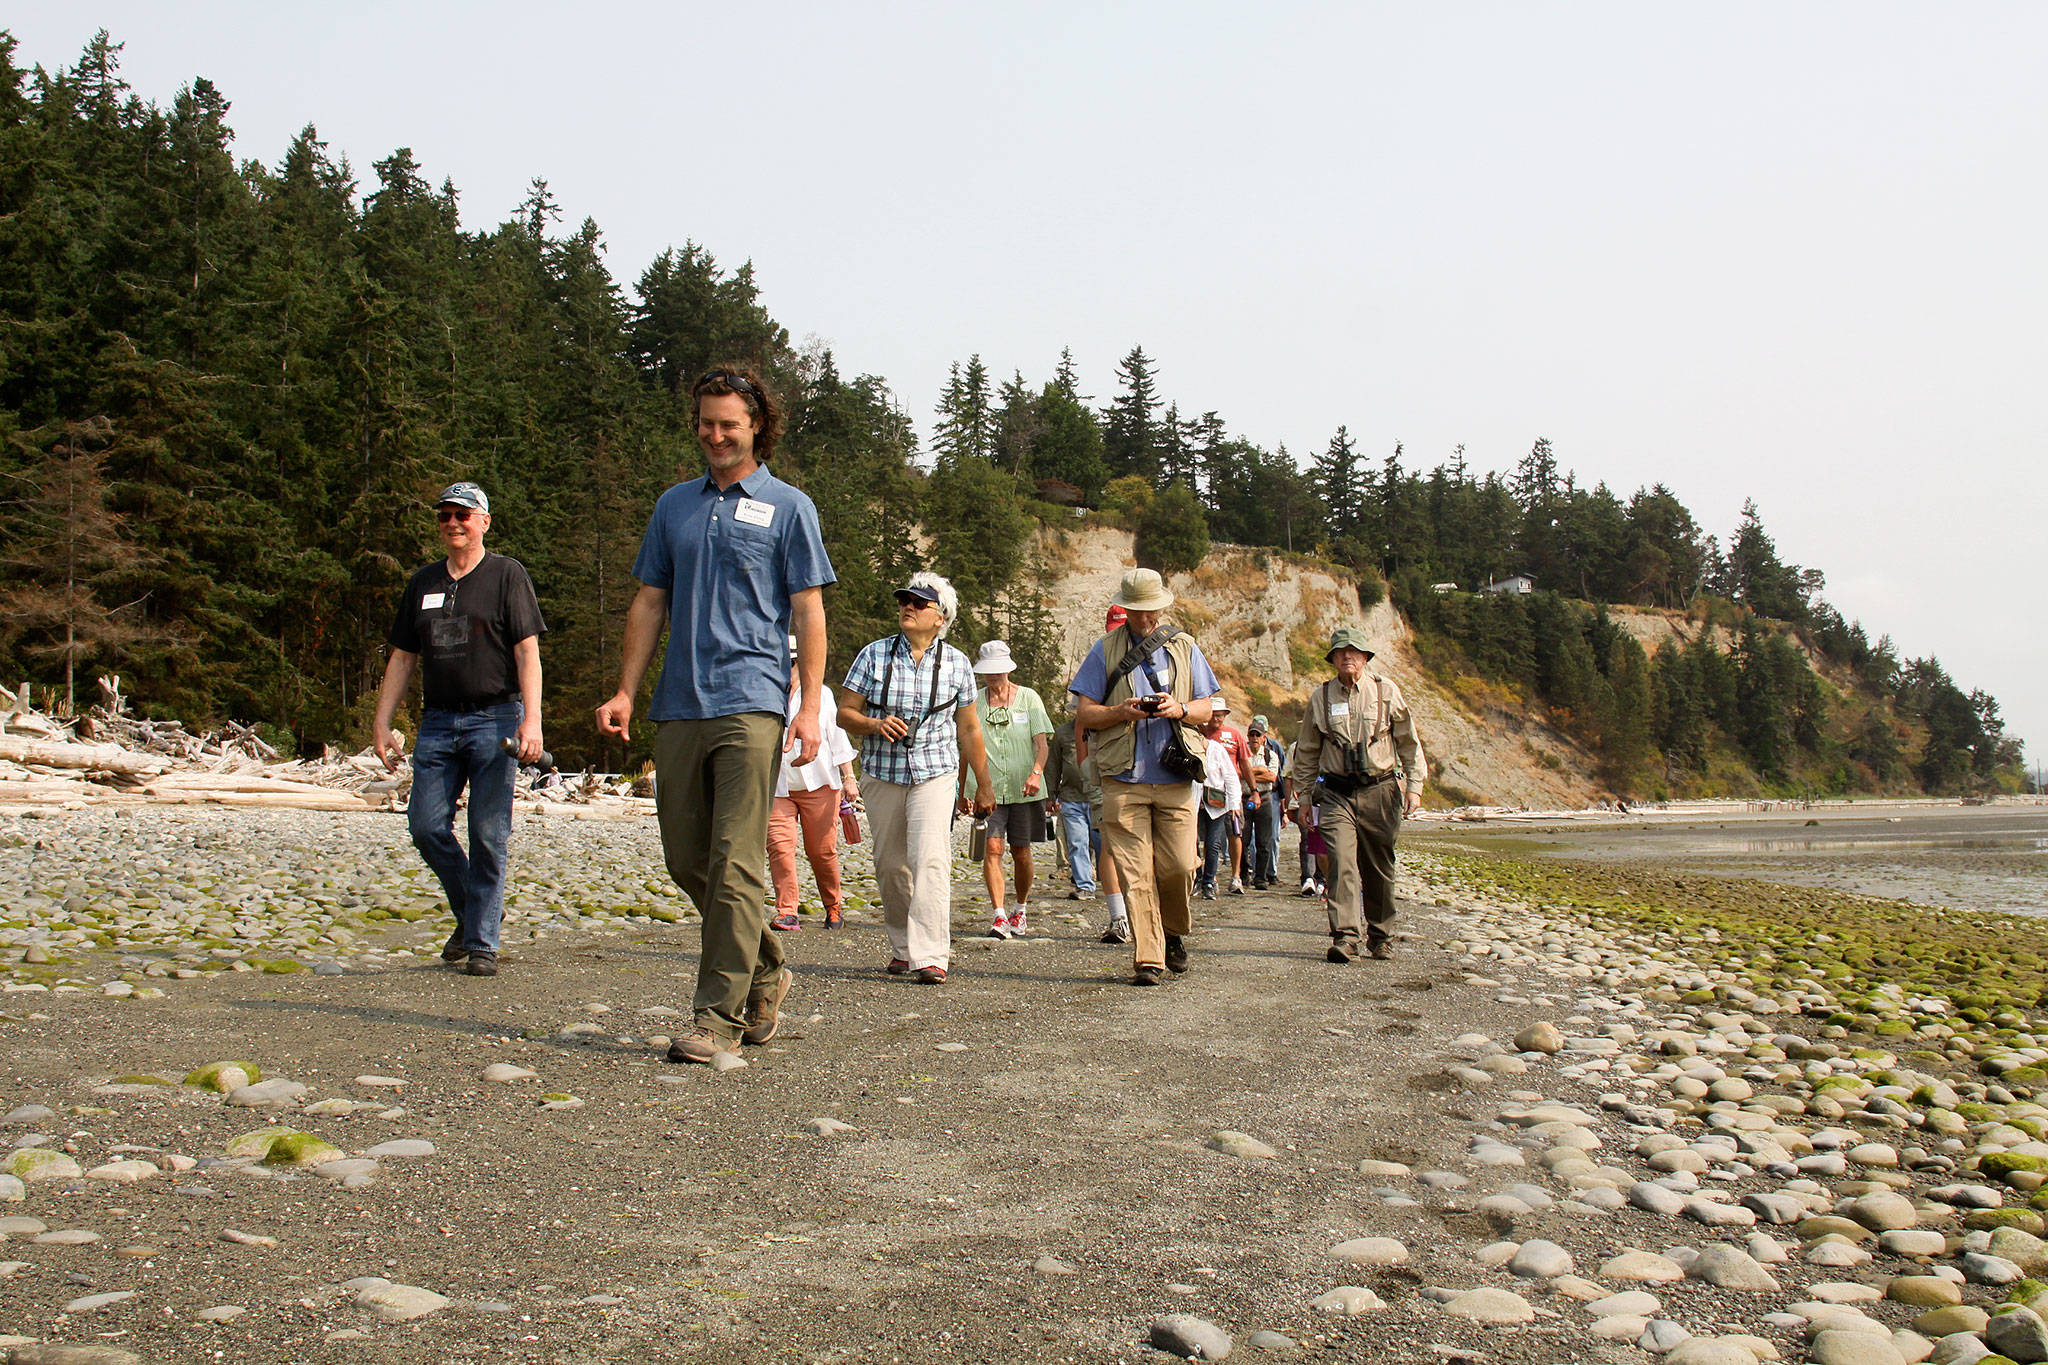 Ryan Elting, conservation director for the Whidbey Camano Land Trust, leads a tour of Barnum Point on Aug. 5. The scenic park, which is being expanded, is located at Triangle Cove on Camano Island. (Whidbey Camano Land Trust)